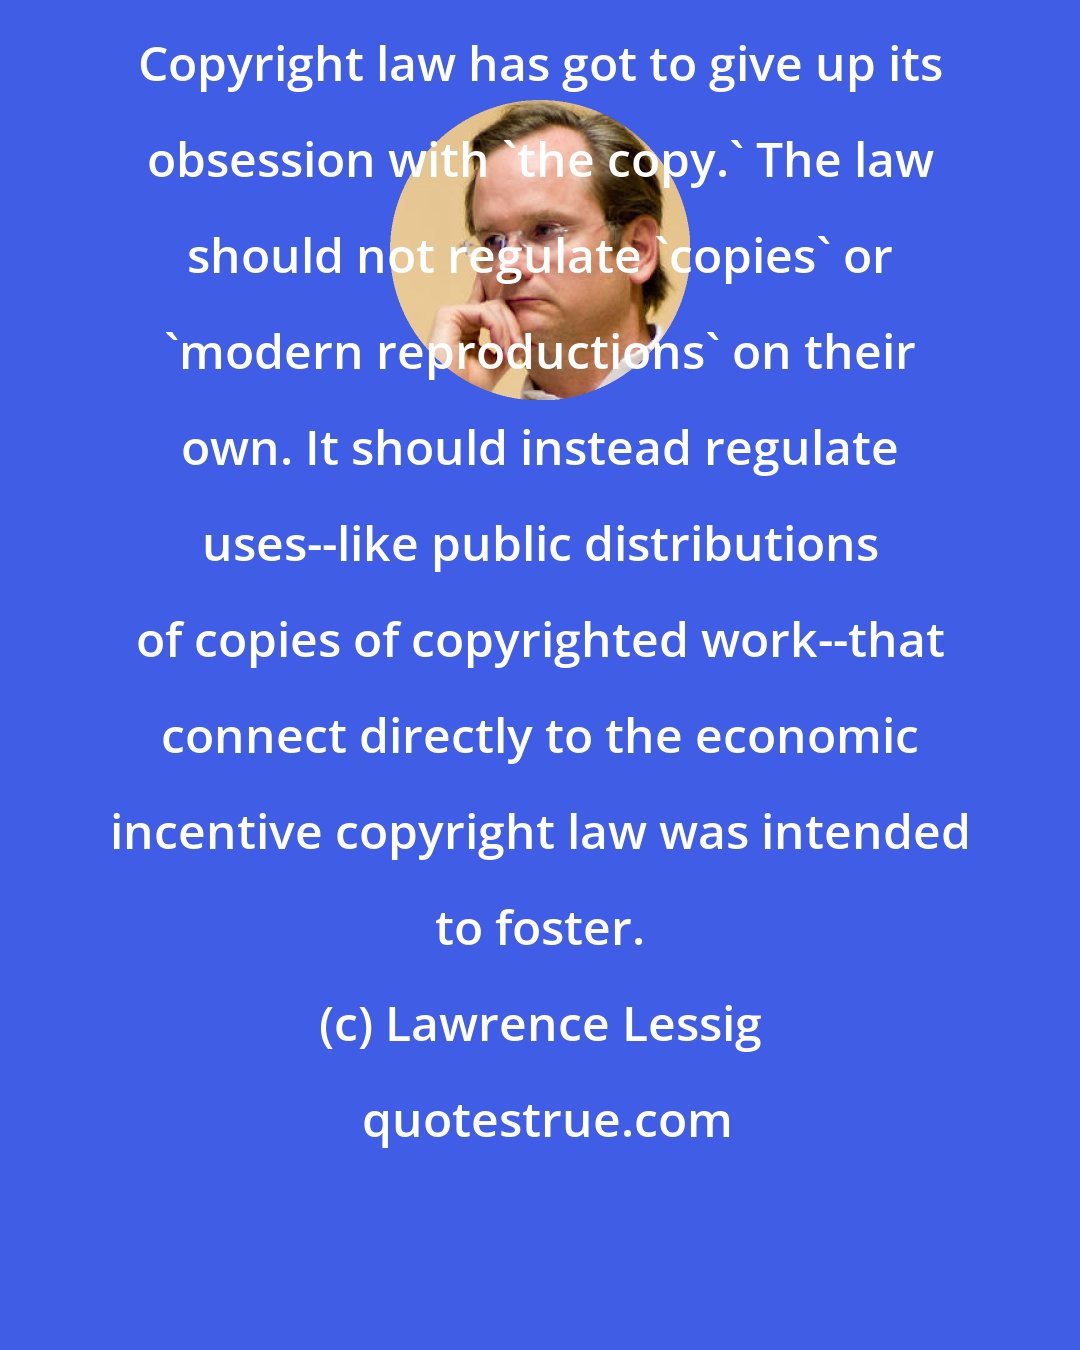 Lawrence Lessig: Copyright law has got to give up its obsession with 'the copy.' The law should not regulate 'copies' or 'modern reproductions' on their own. It should instead regulate uses--like public distributions of copies of copyrighted work--that connect directly to the economic incentive copyright law was intended to foster.